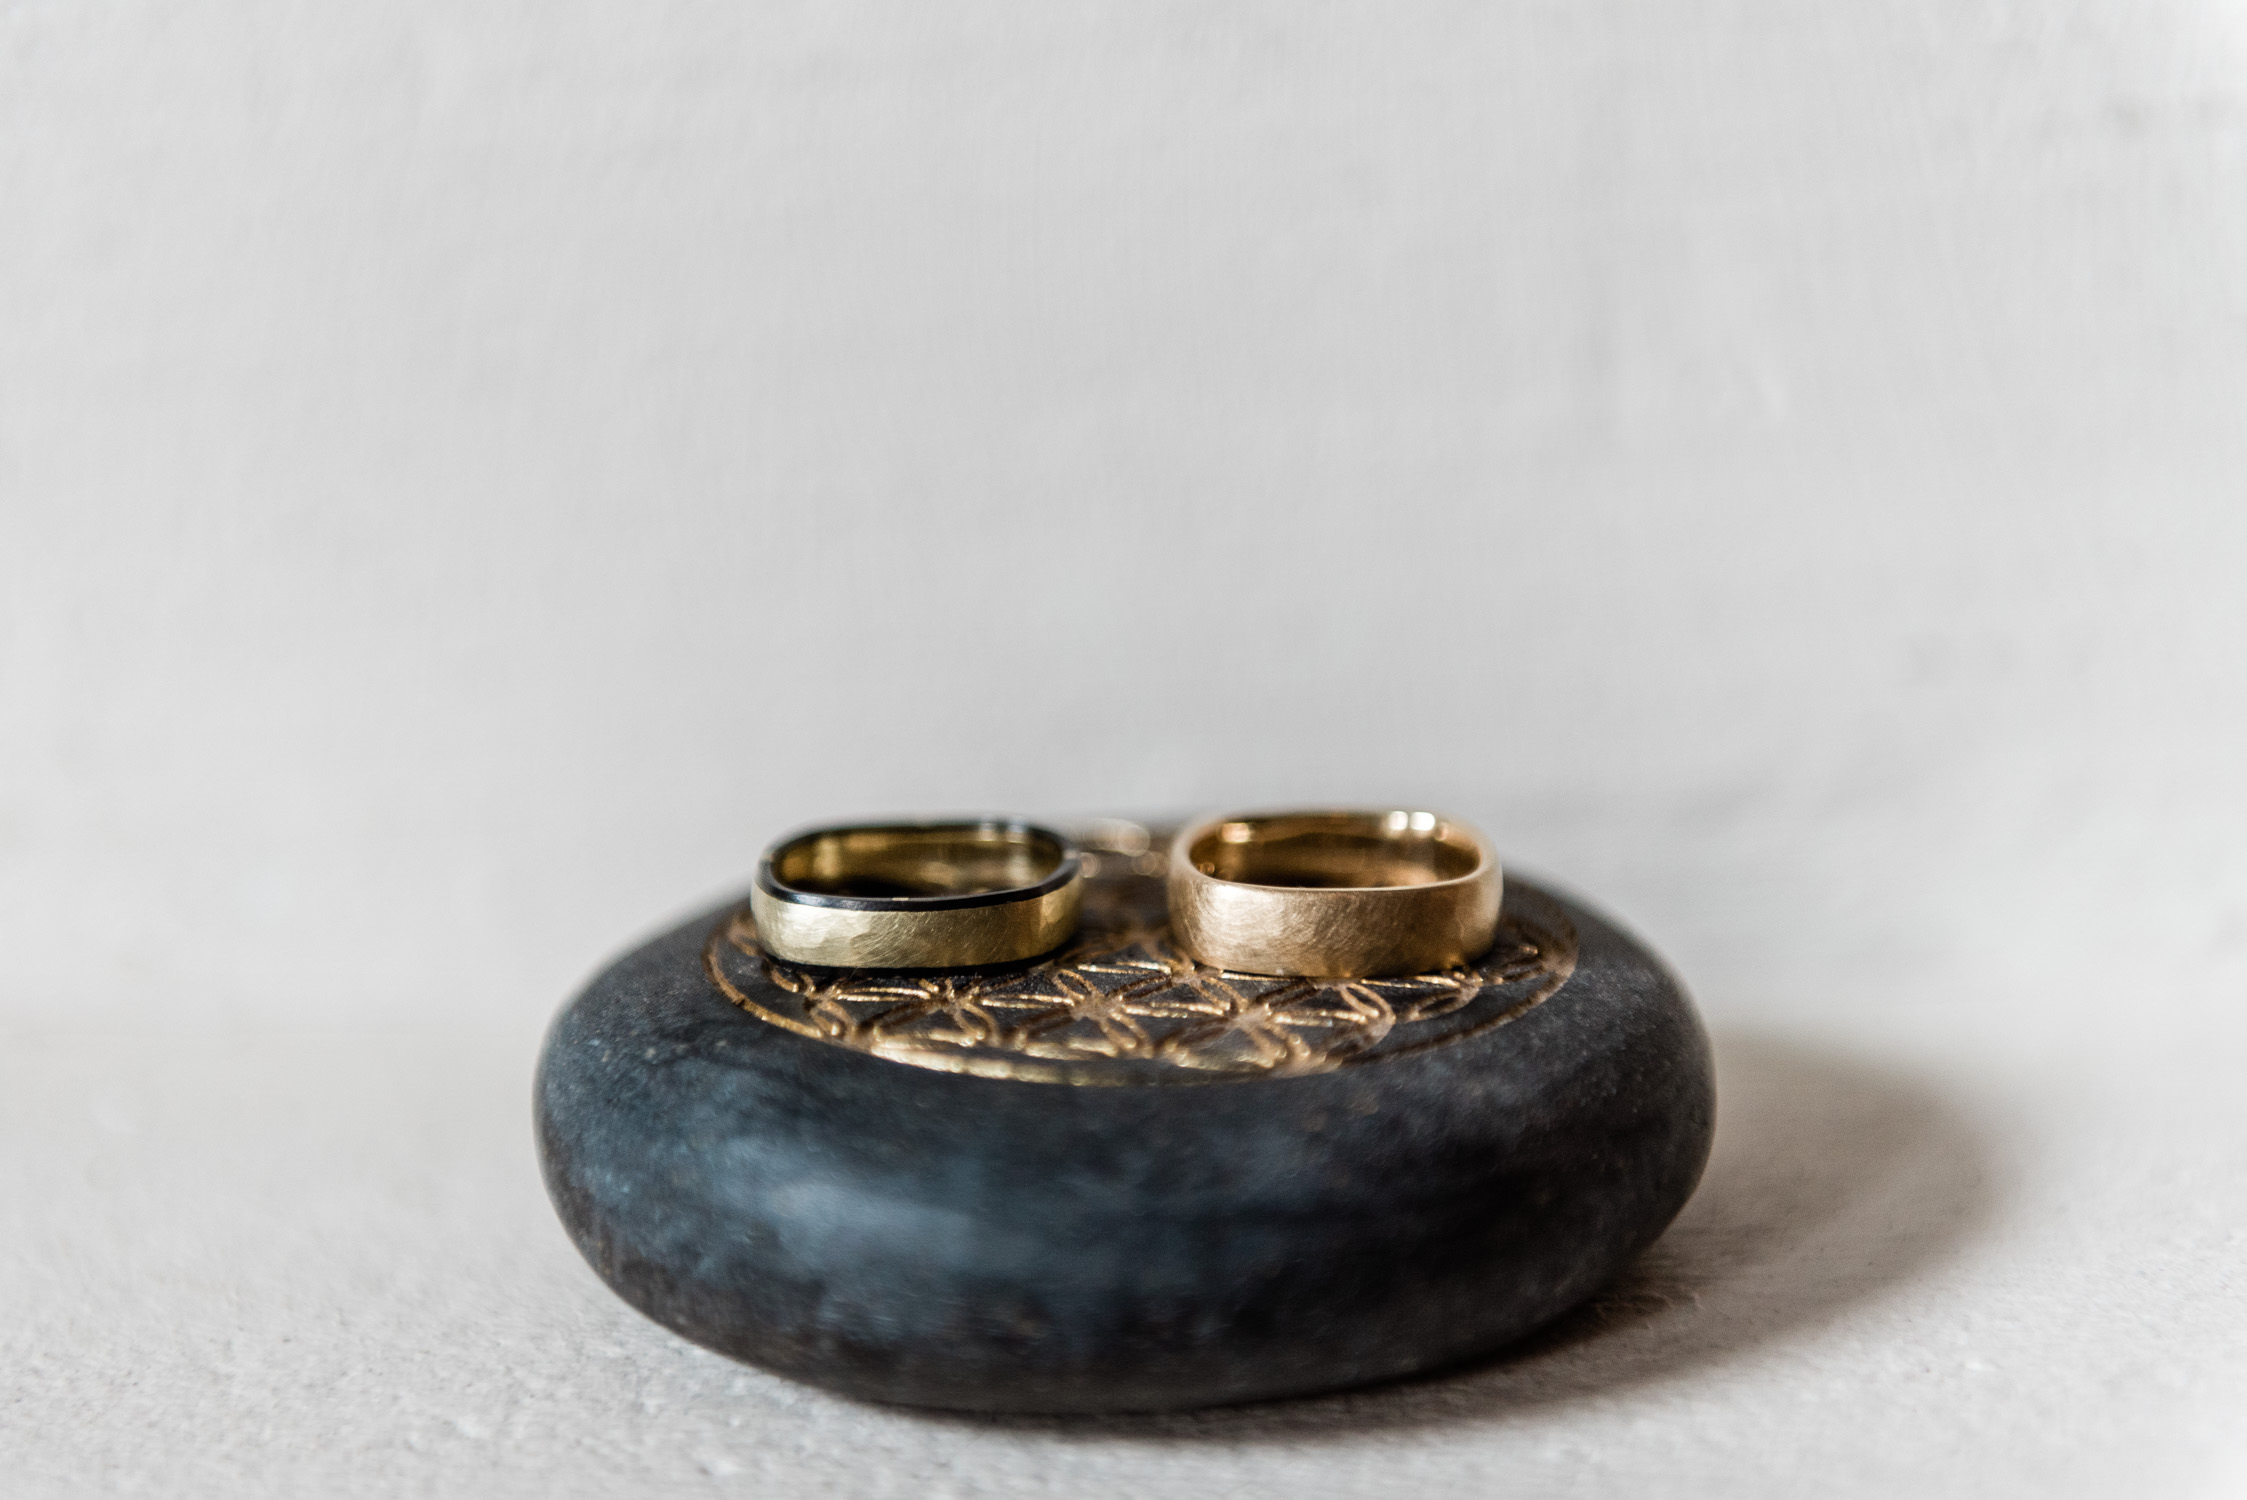 Two male wedding rings at a wedding in Amsterdam